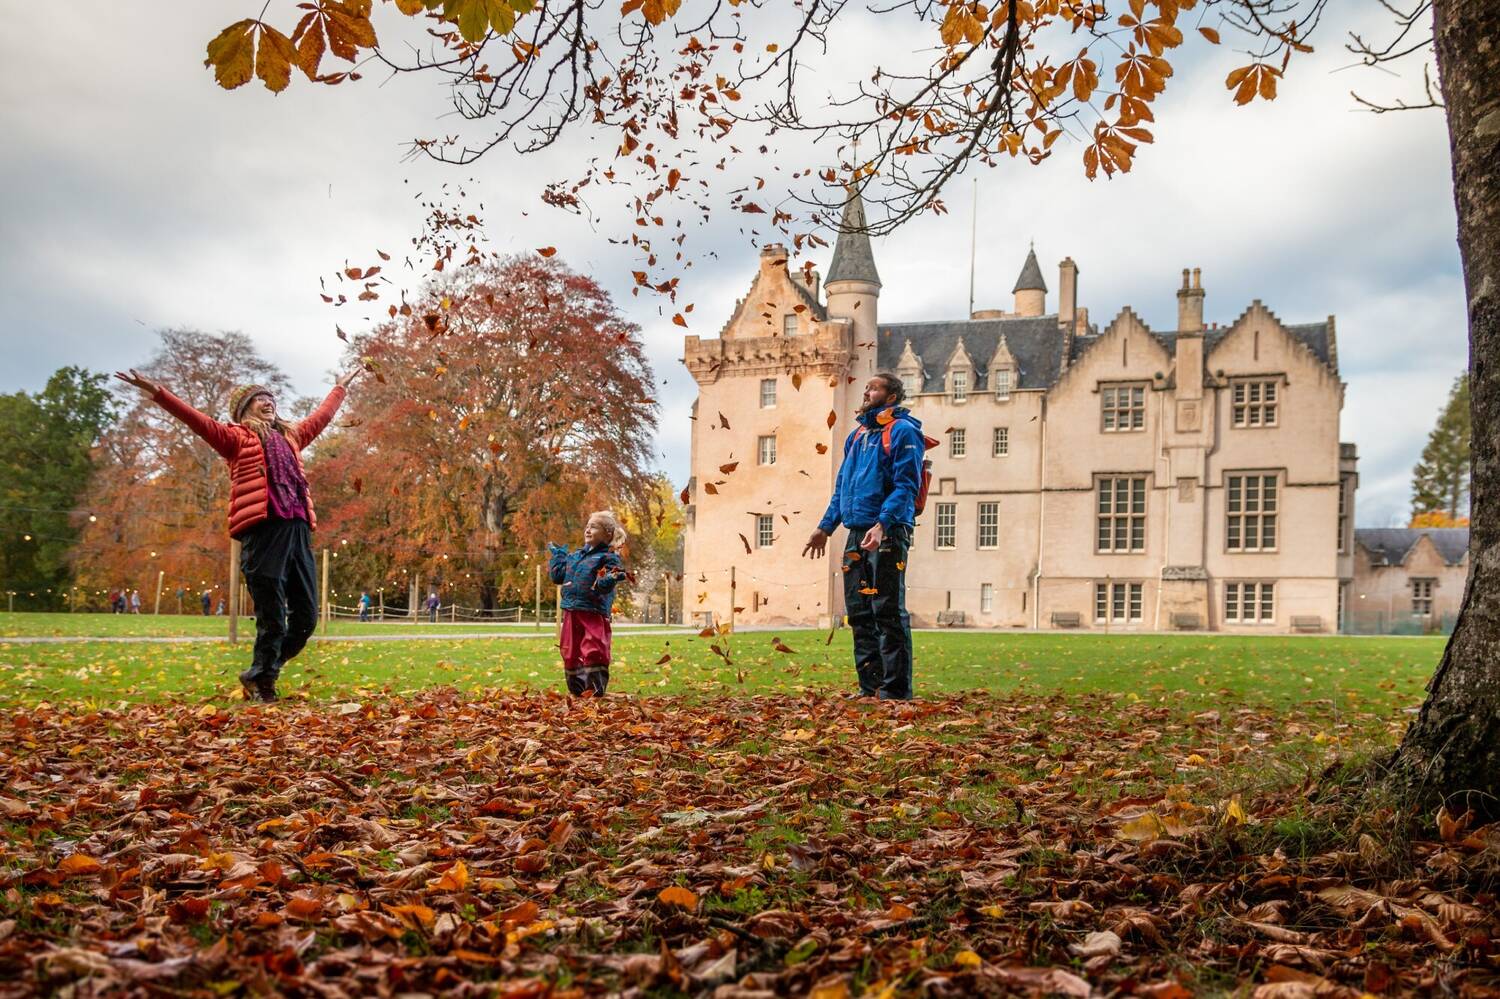 A family is playing among fallen autumn leaves underneath a tree. A grand castle is behind them.